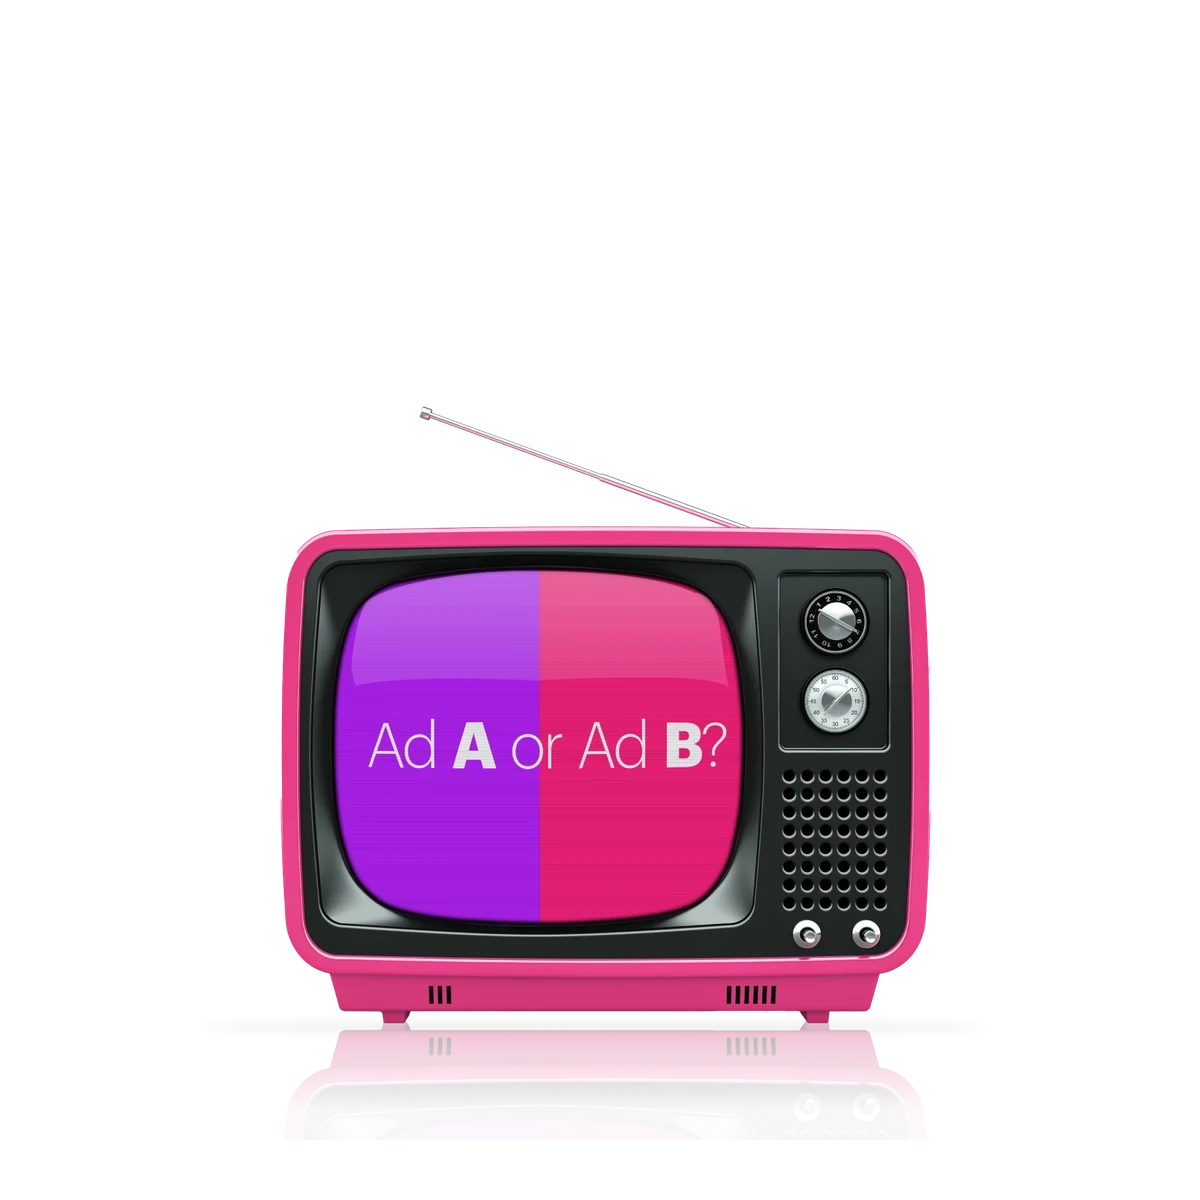 old school pink TV with 2 ads and related icons in the background